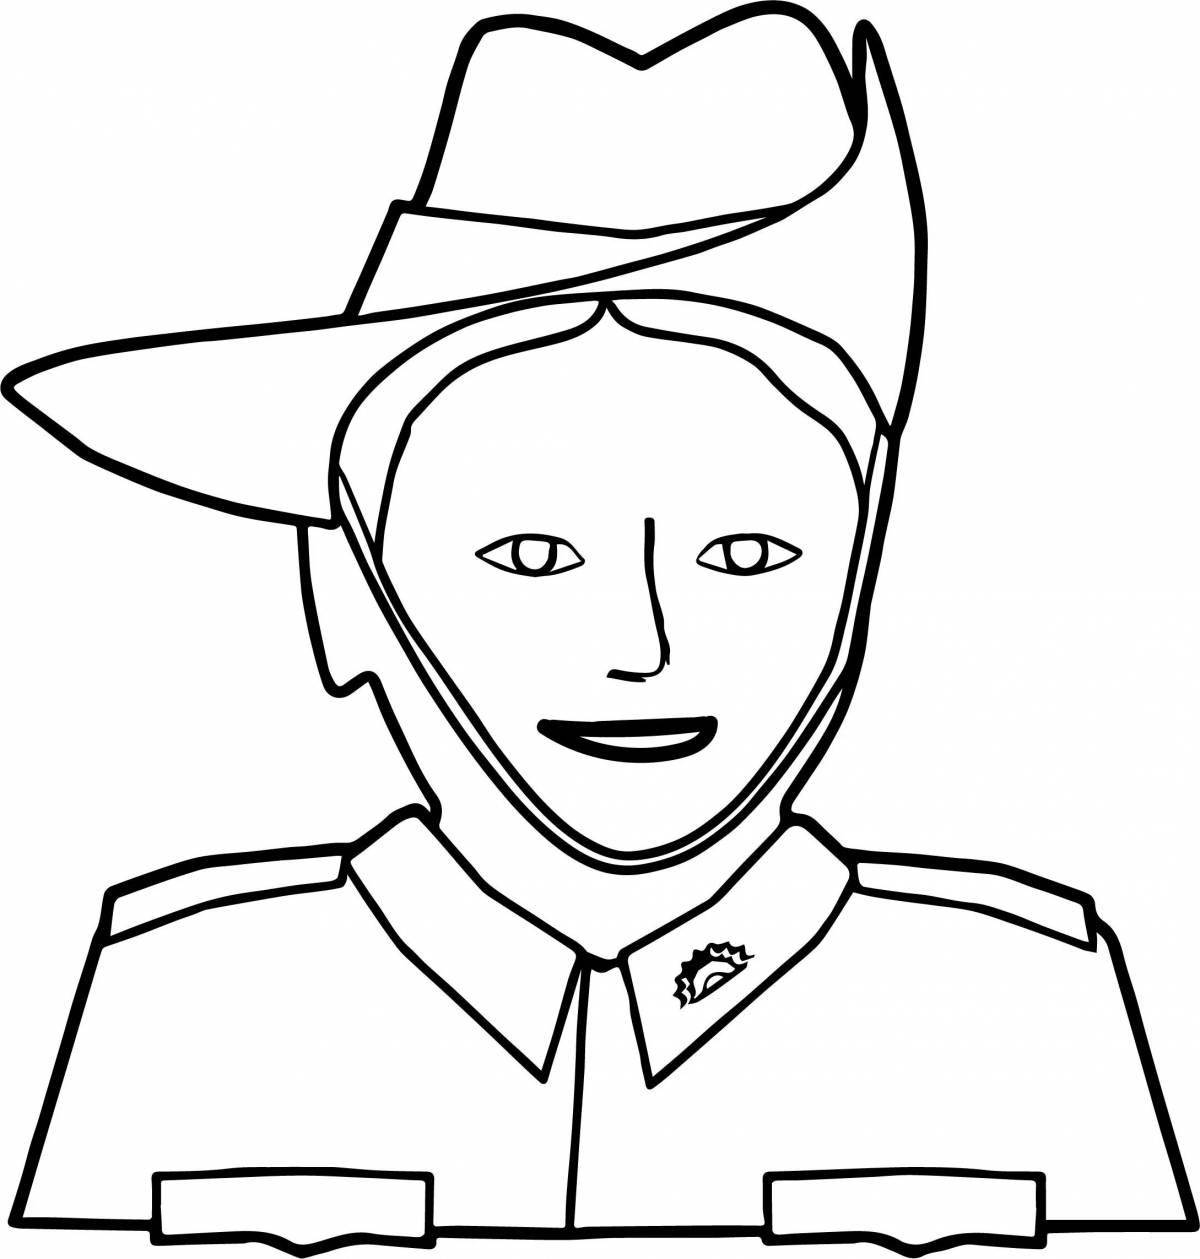 Attractive soldier face coloring page for kids